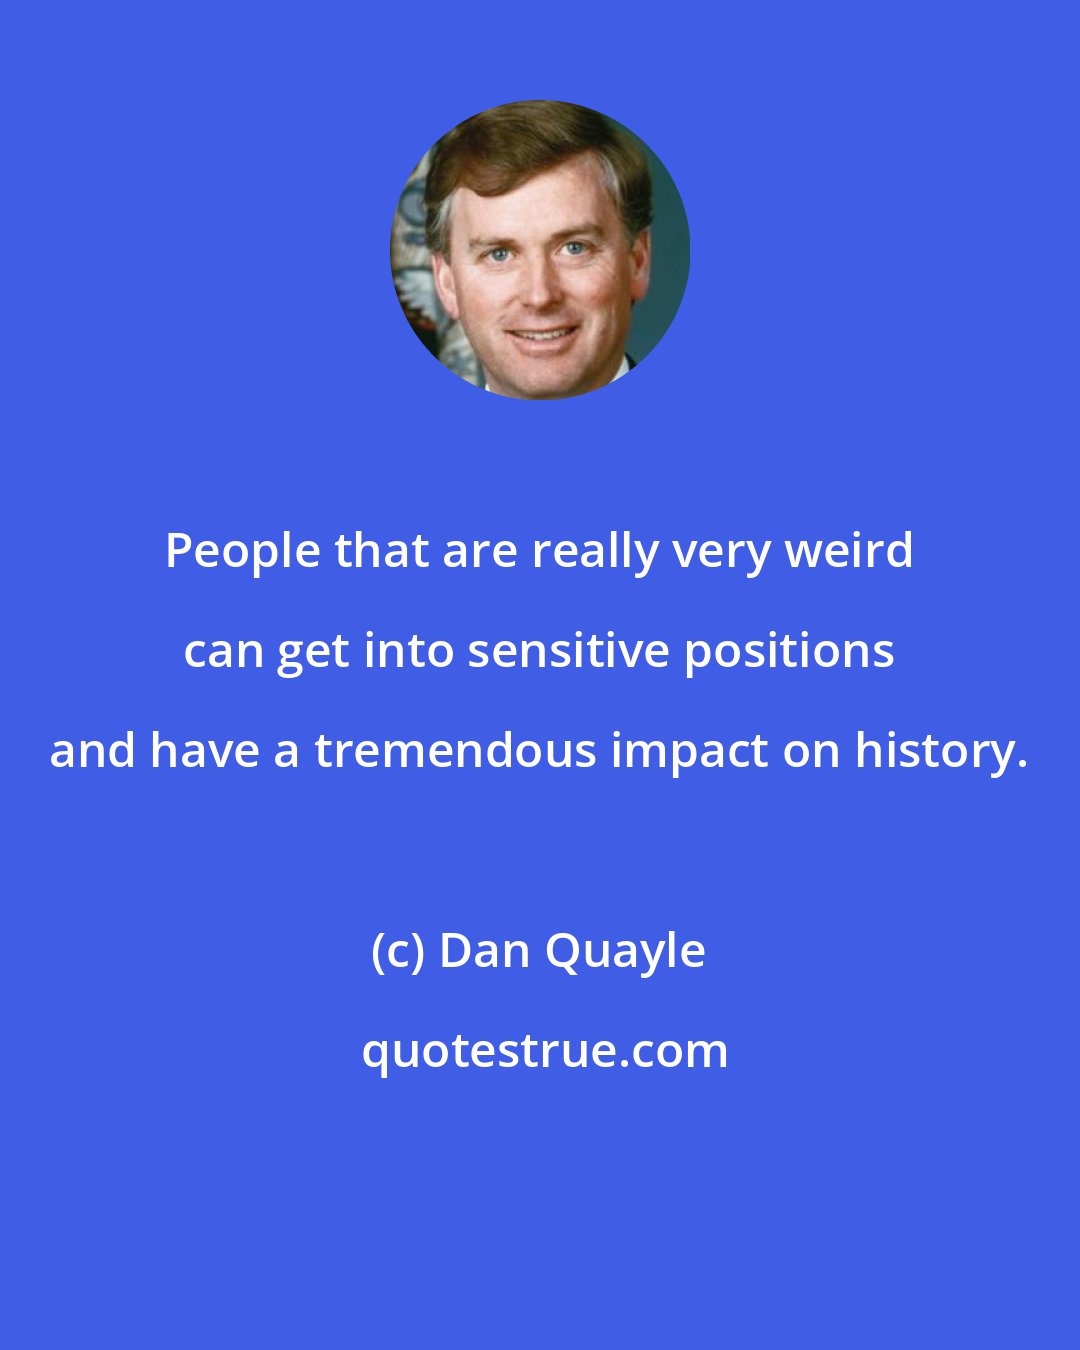 Dan Quayle: People that are really very weird can get into sensitive positions and have a tremendous impact on history.